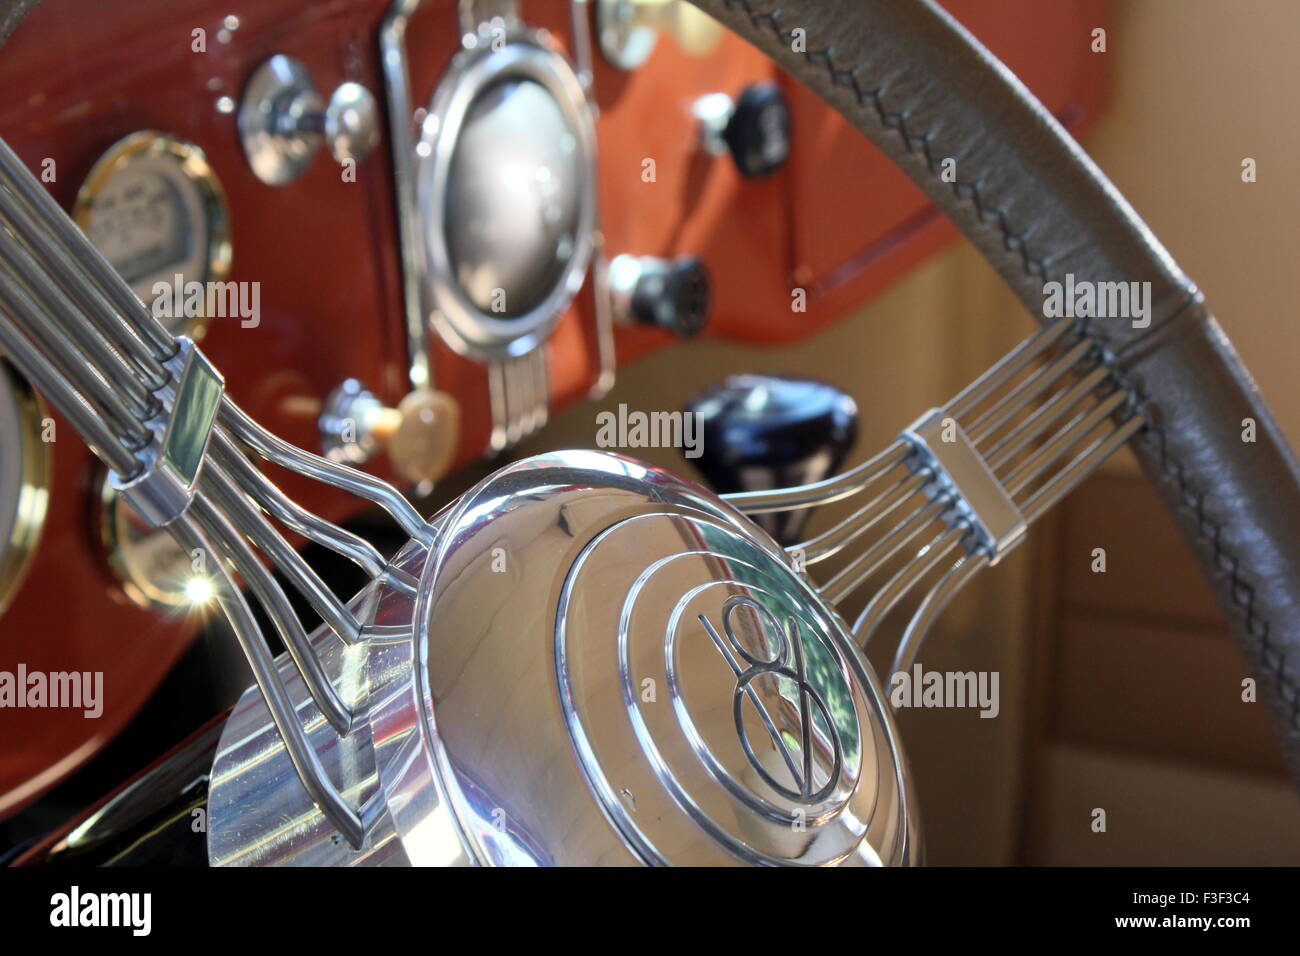 Steering wheel and instrument cluster of a classic car. Stock Photo